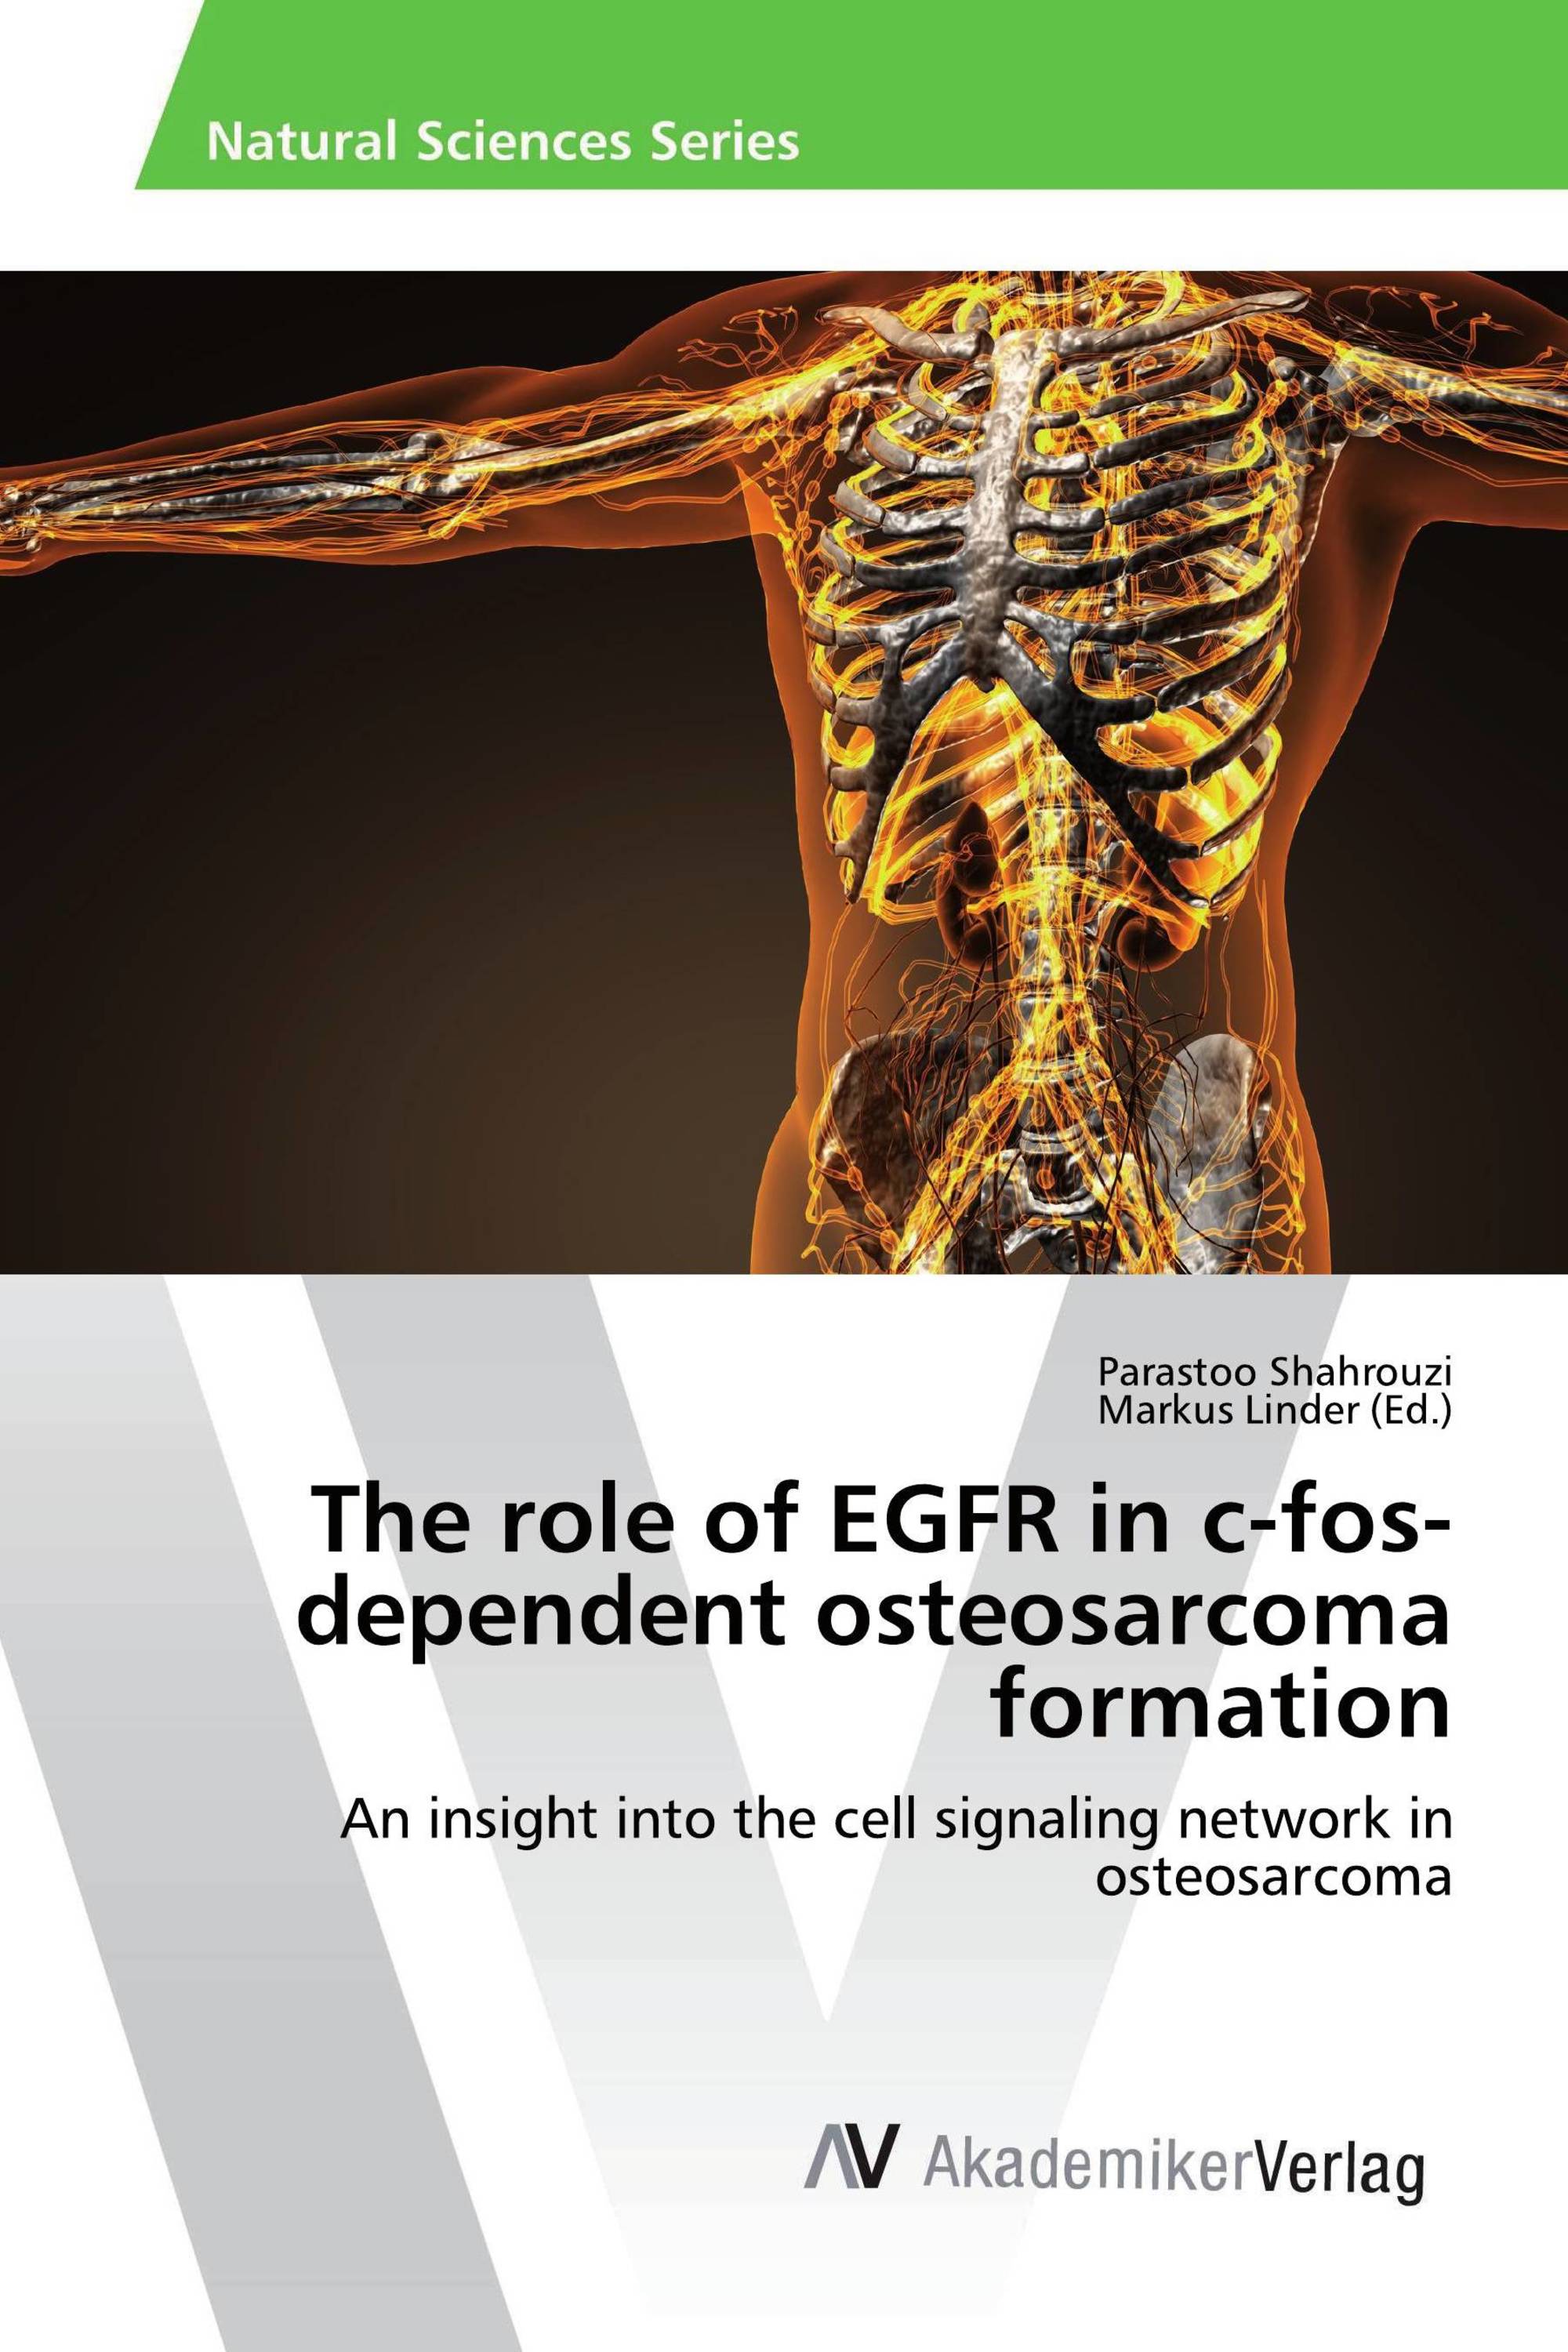 The role of EGFR in c-fos-dependent osteosarcoma formation